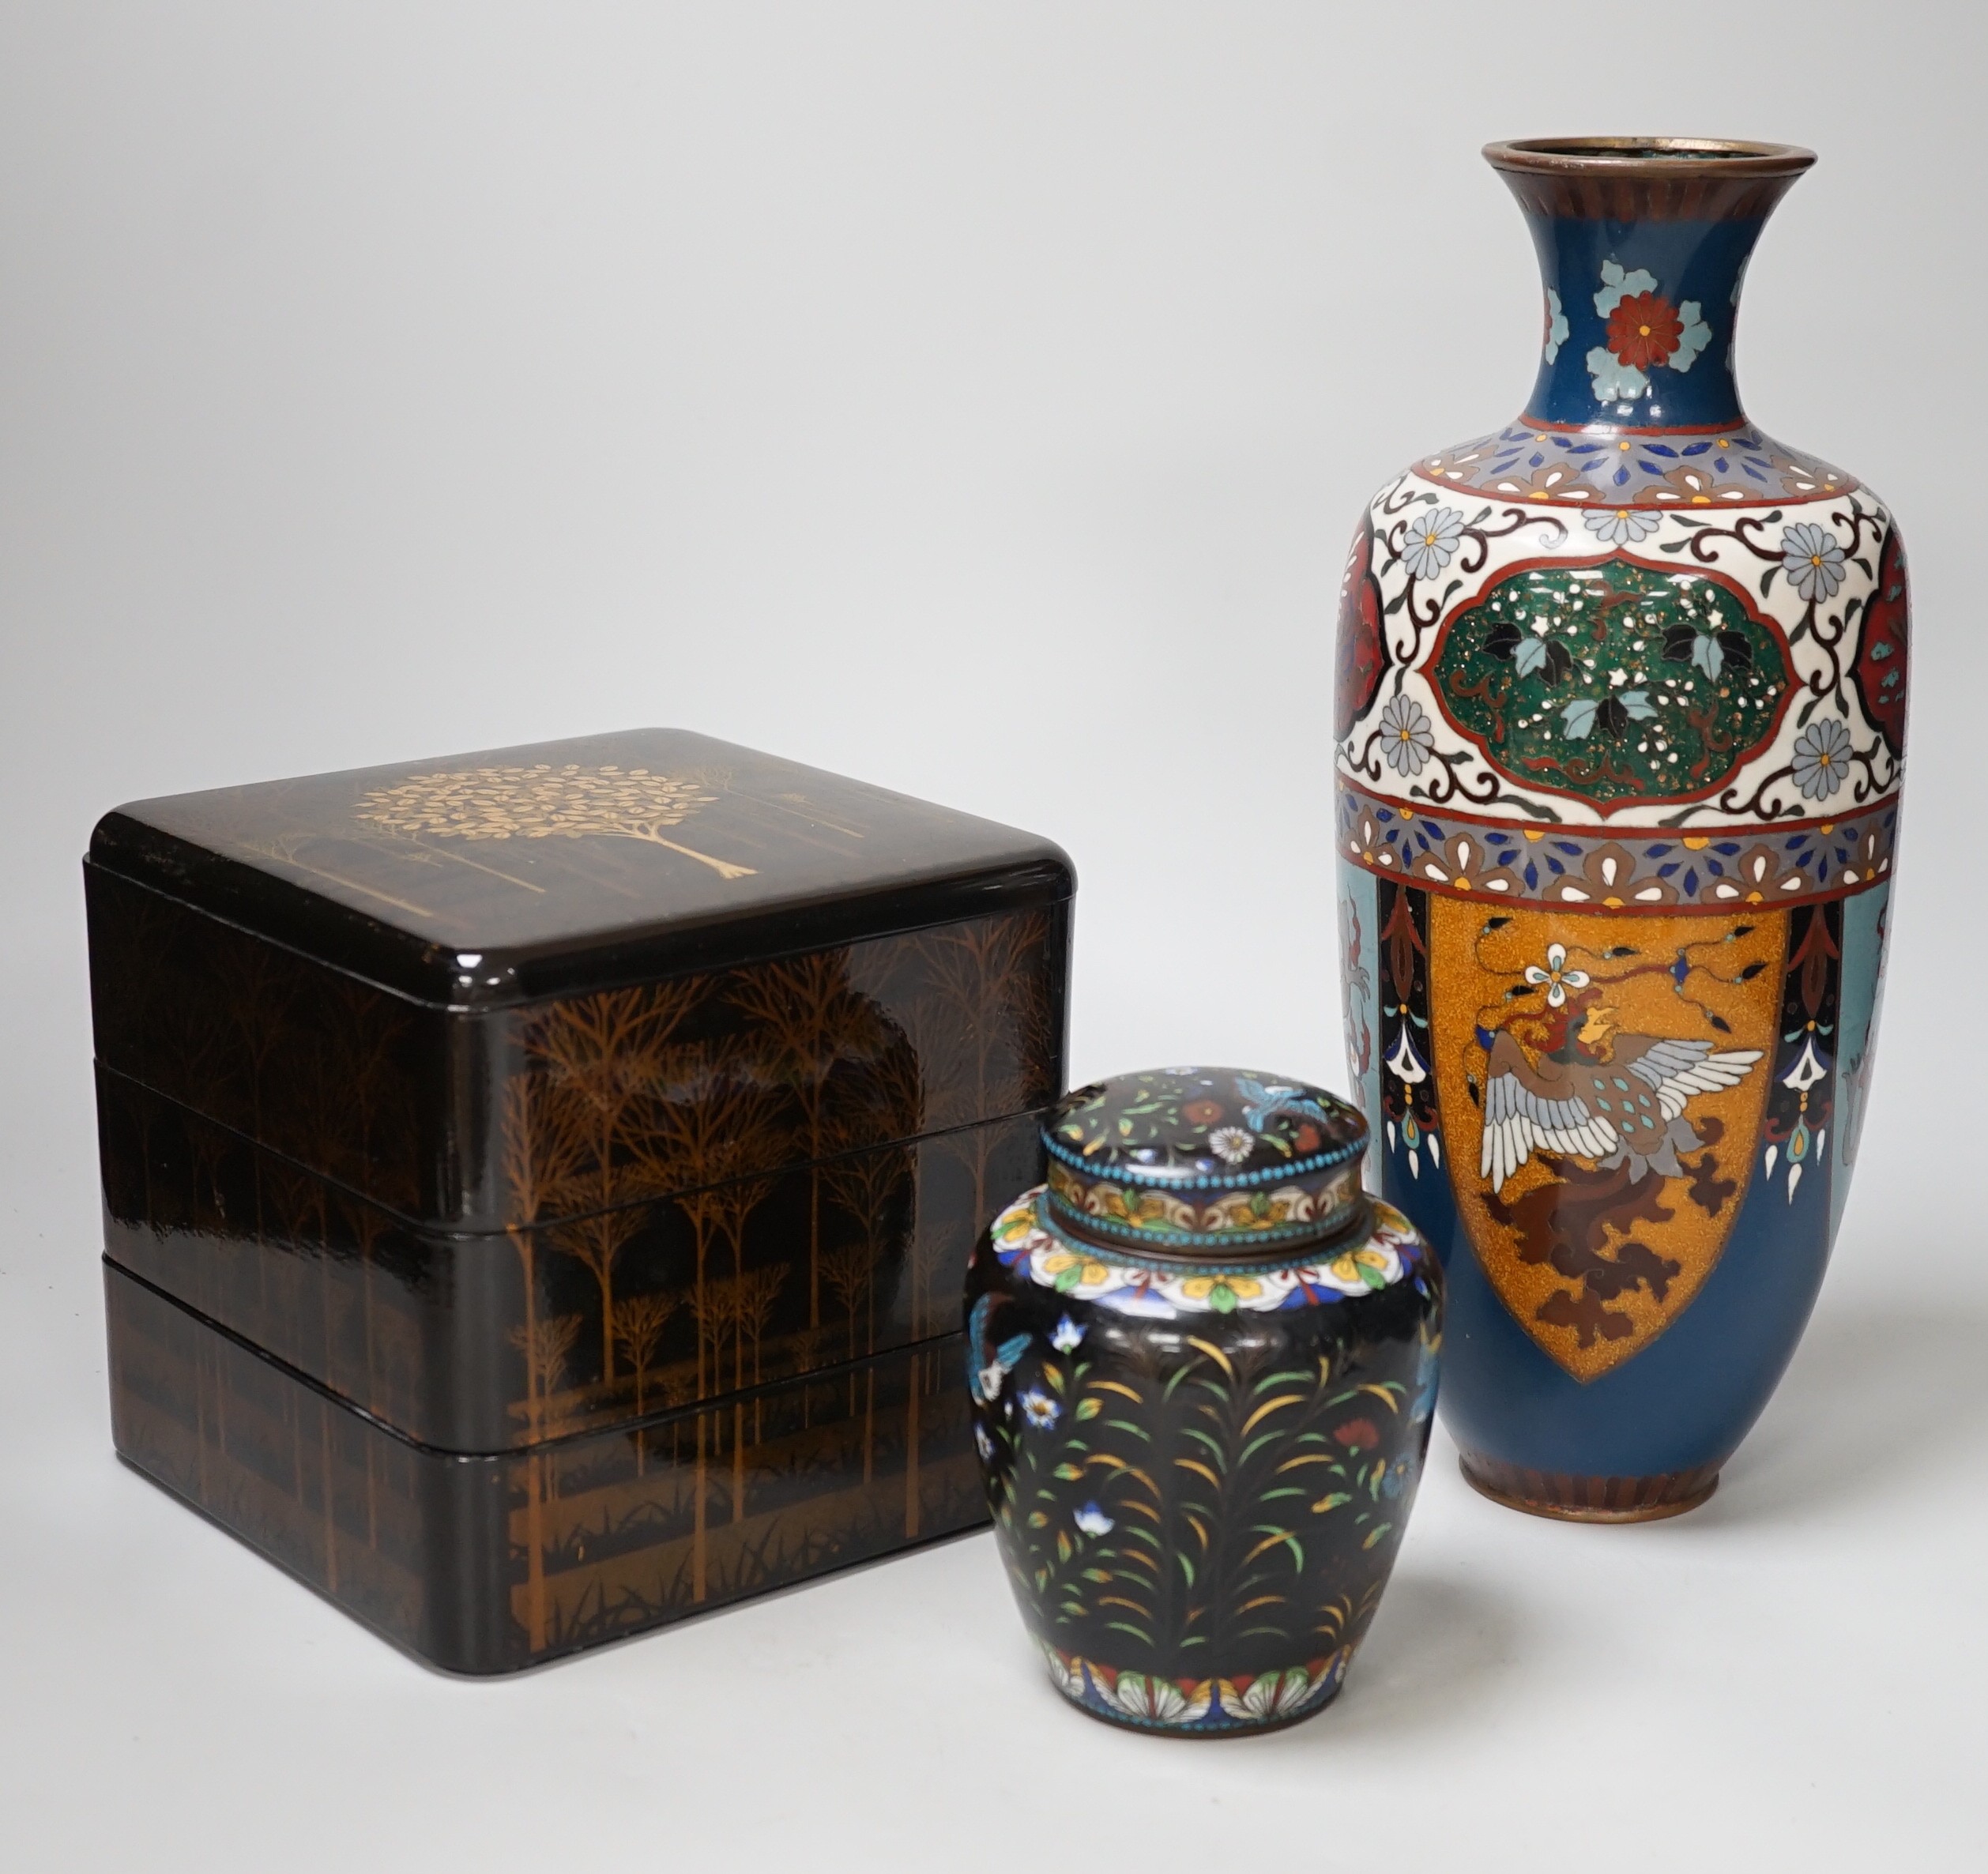 A large Japanese cloisonné enamel vase, 30.5cm high, a similar jar and cover and a Japanese lacquered tiered box with 3-4 drawers. Tree design in gold lacquer.